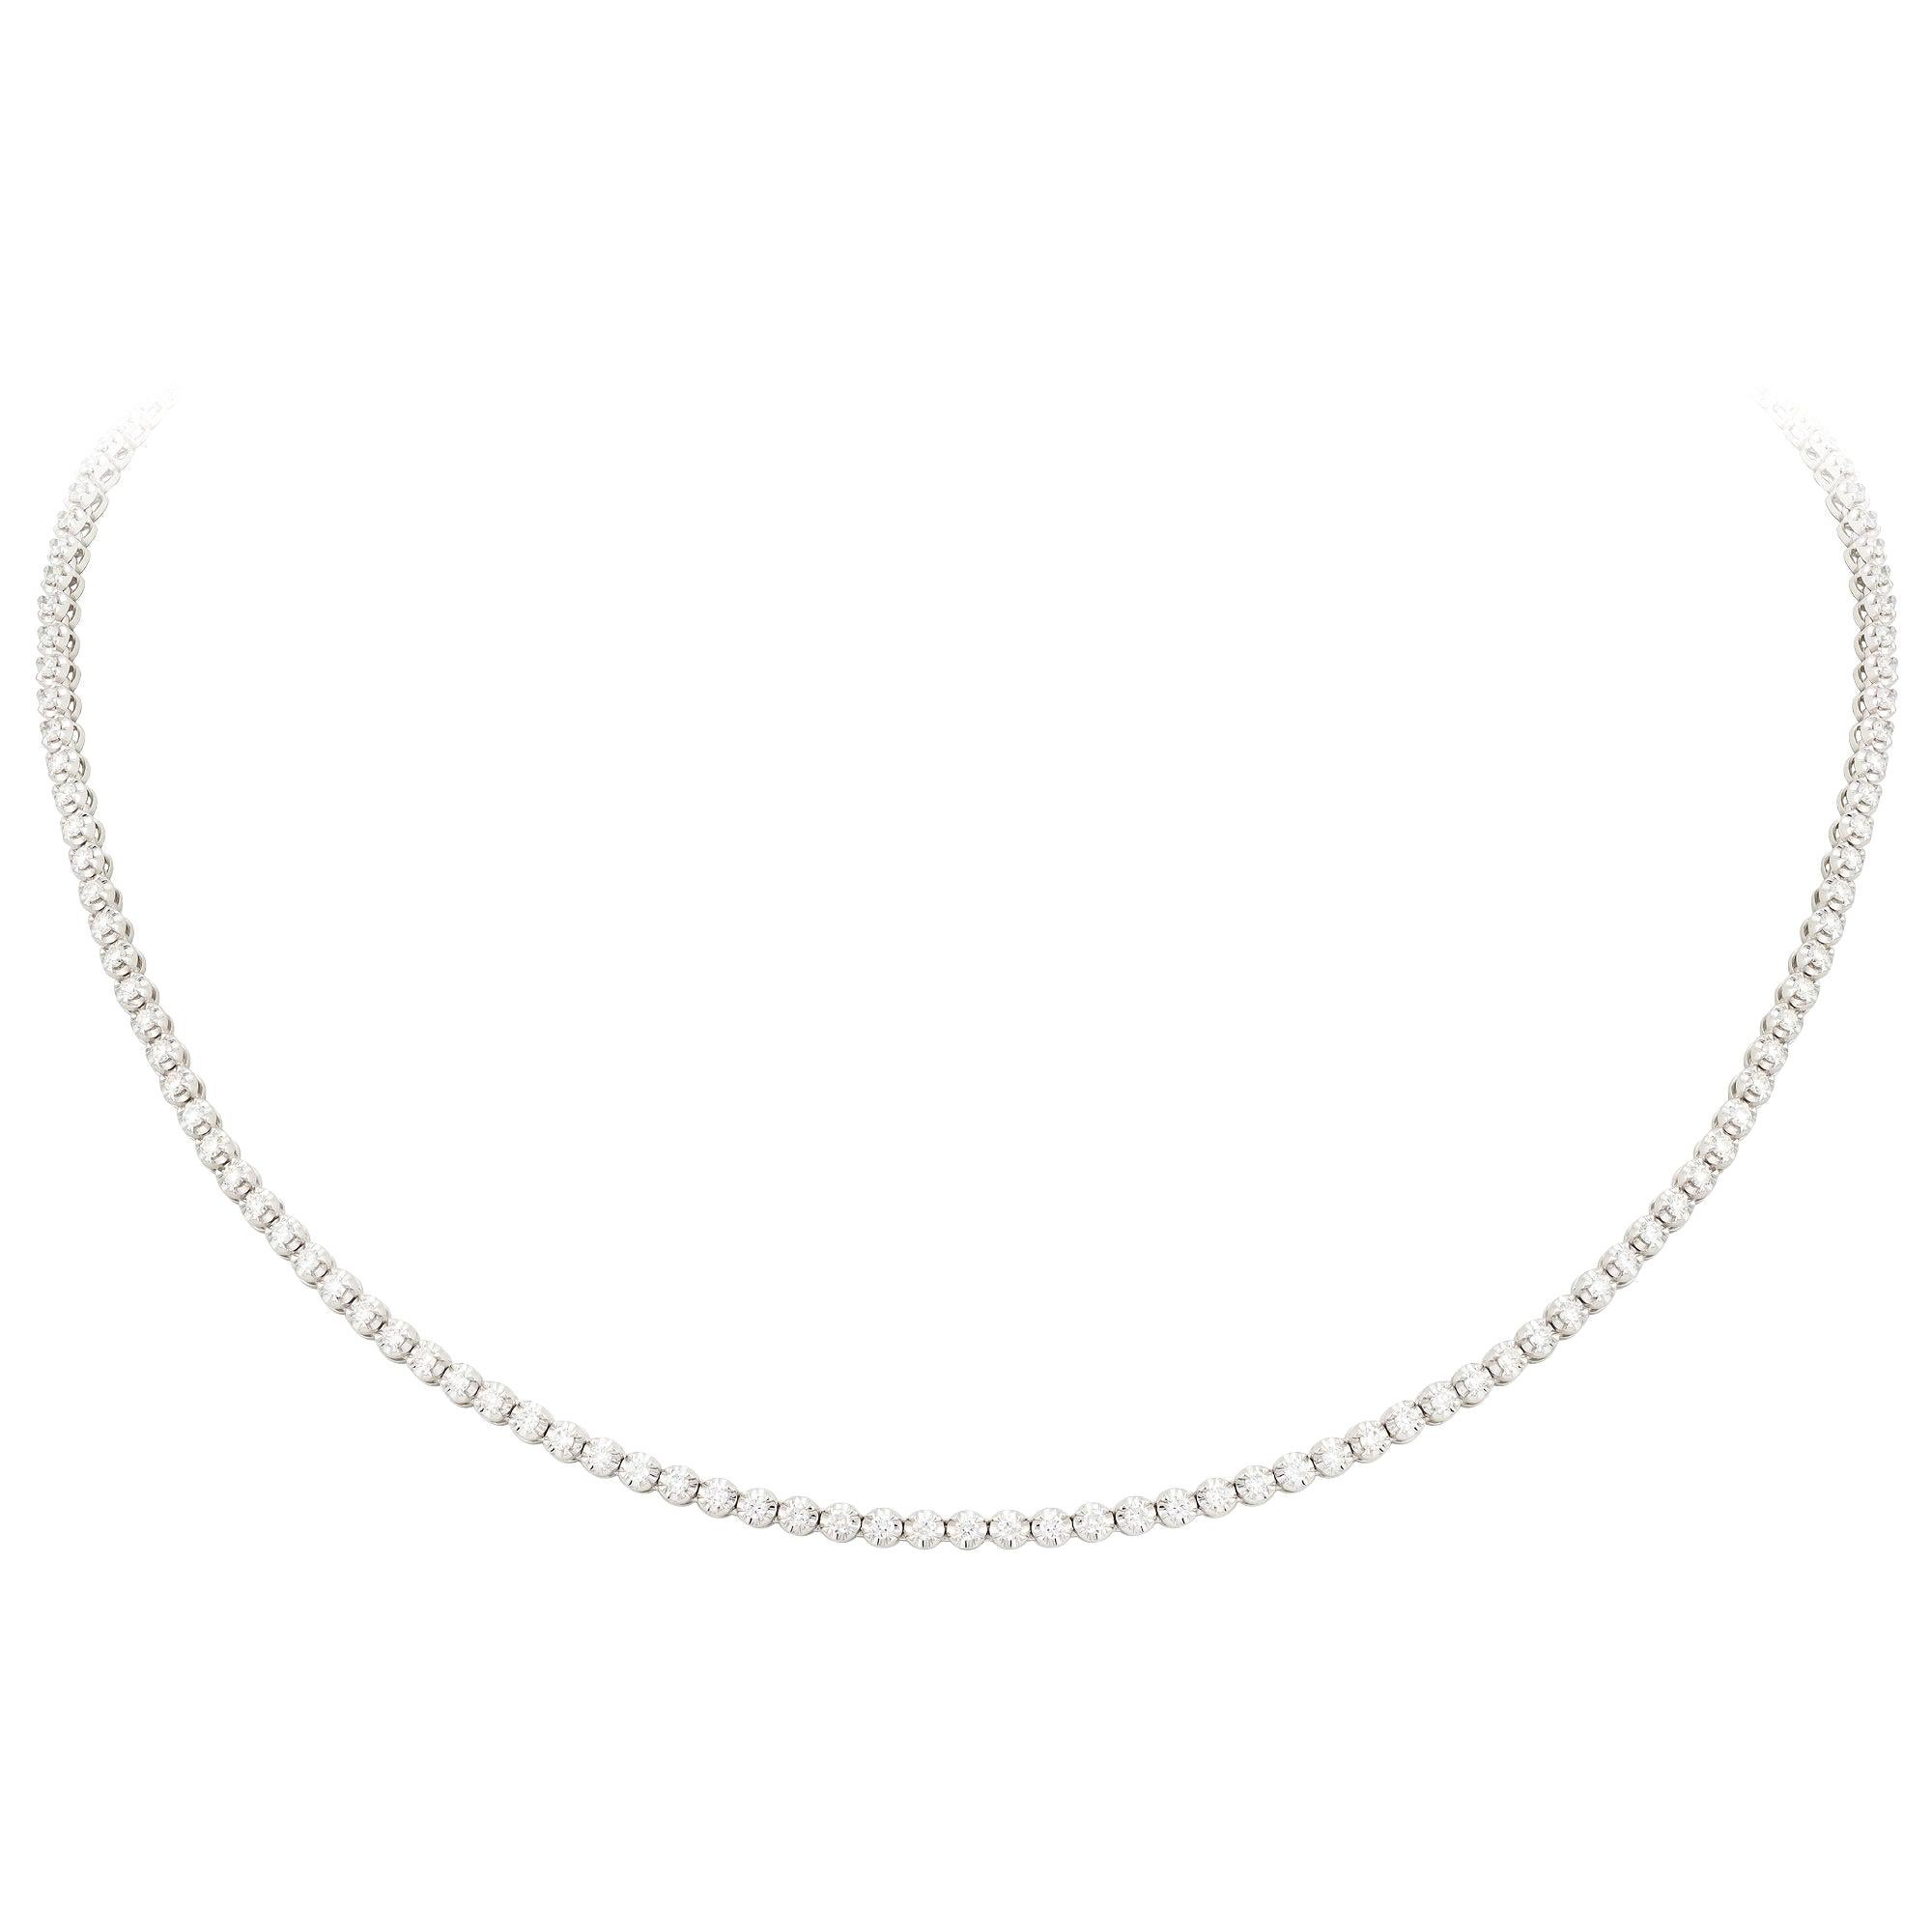 Illusion Setting Classic Diamond Necklace 18k White Gold for Her